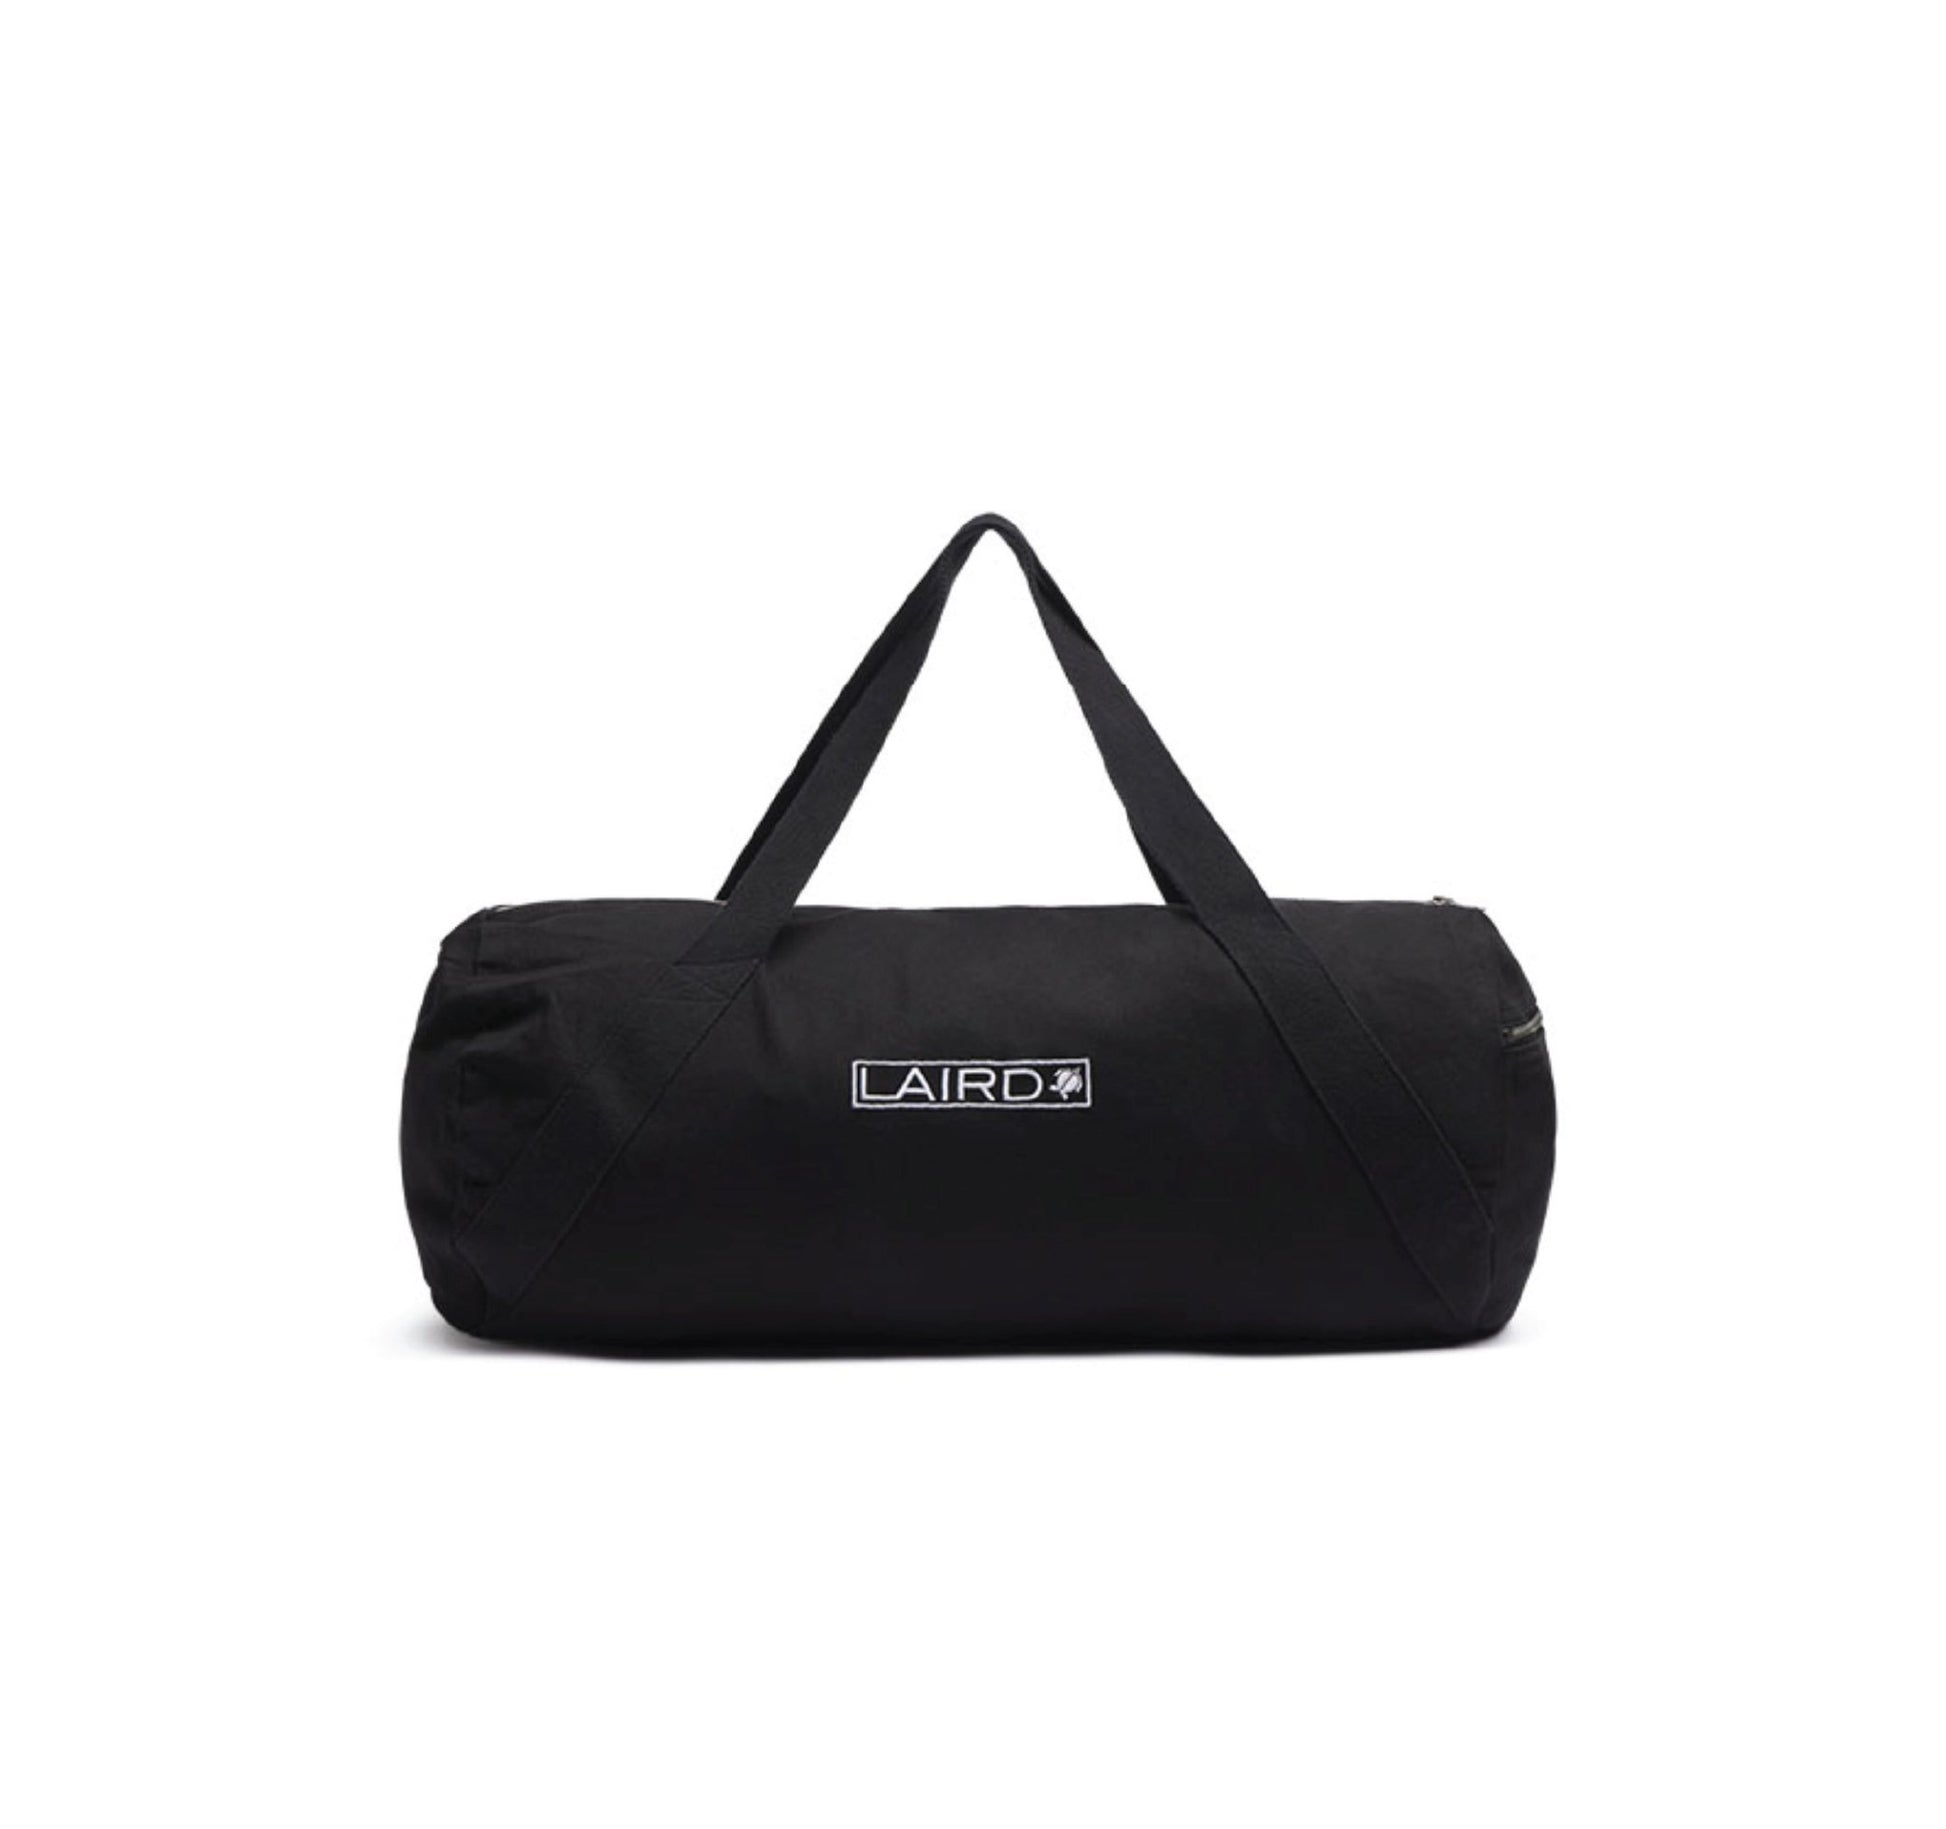 LAIRD Duffle Bag (the DUFFLE) - LAIRD